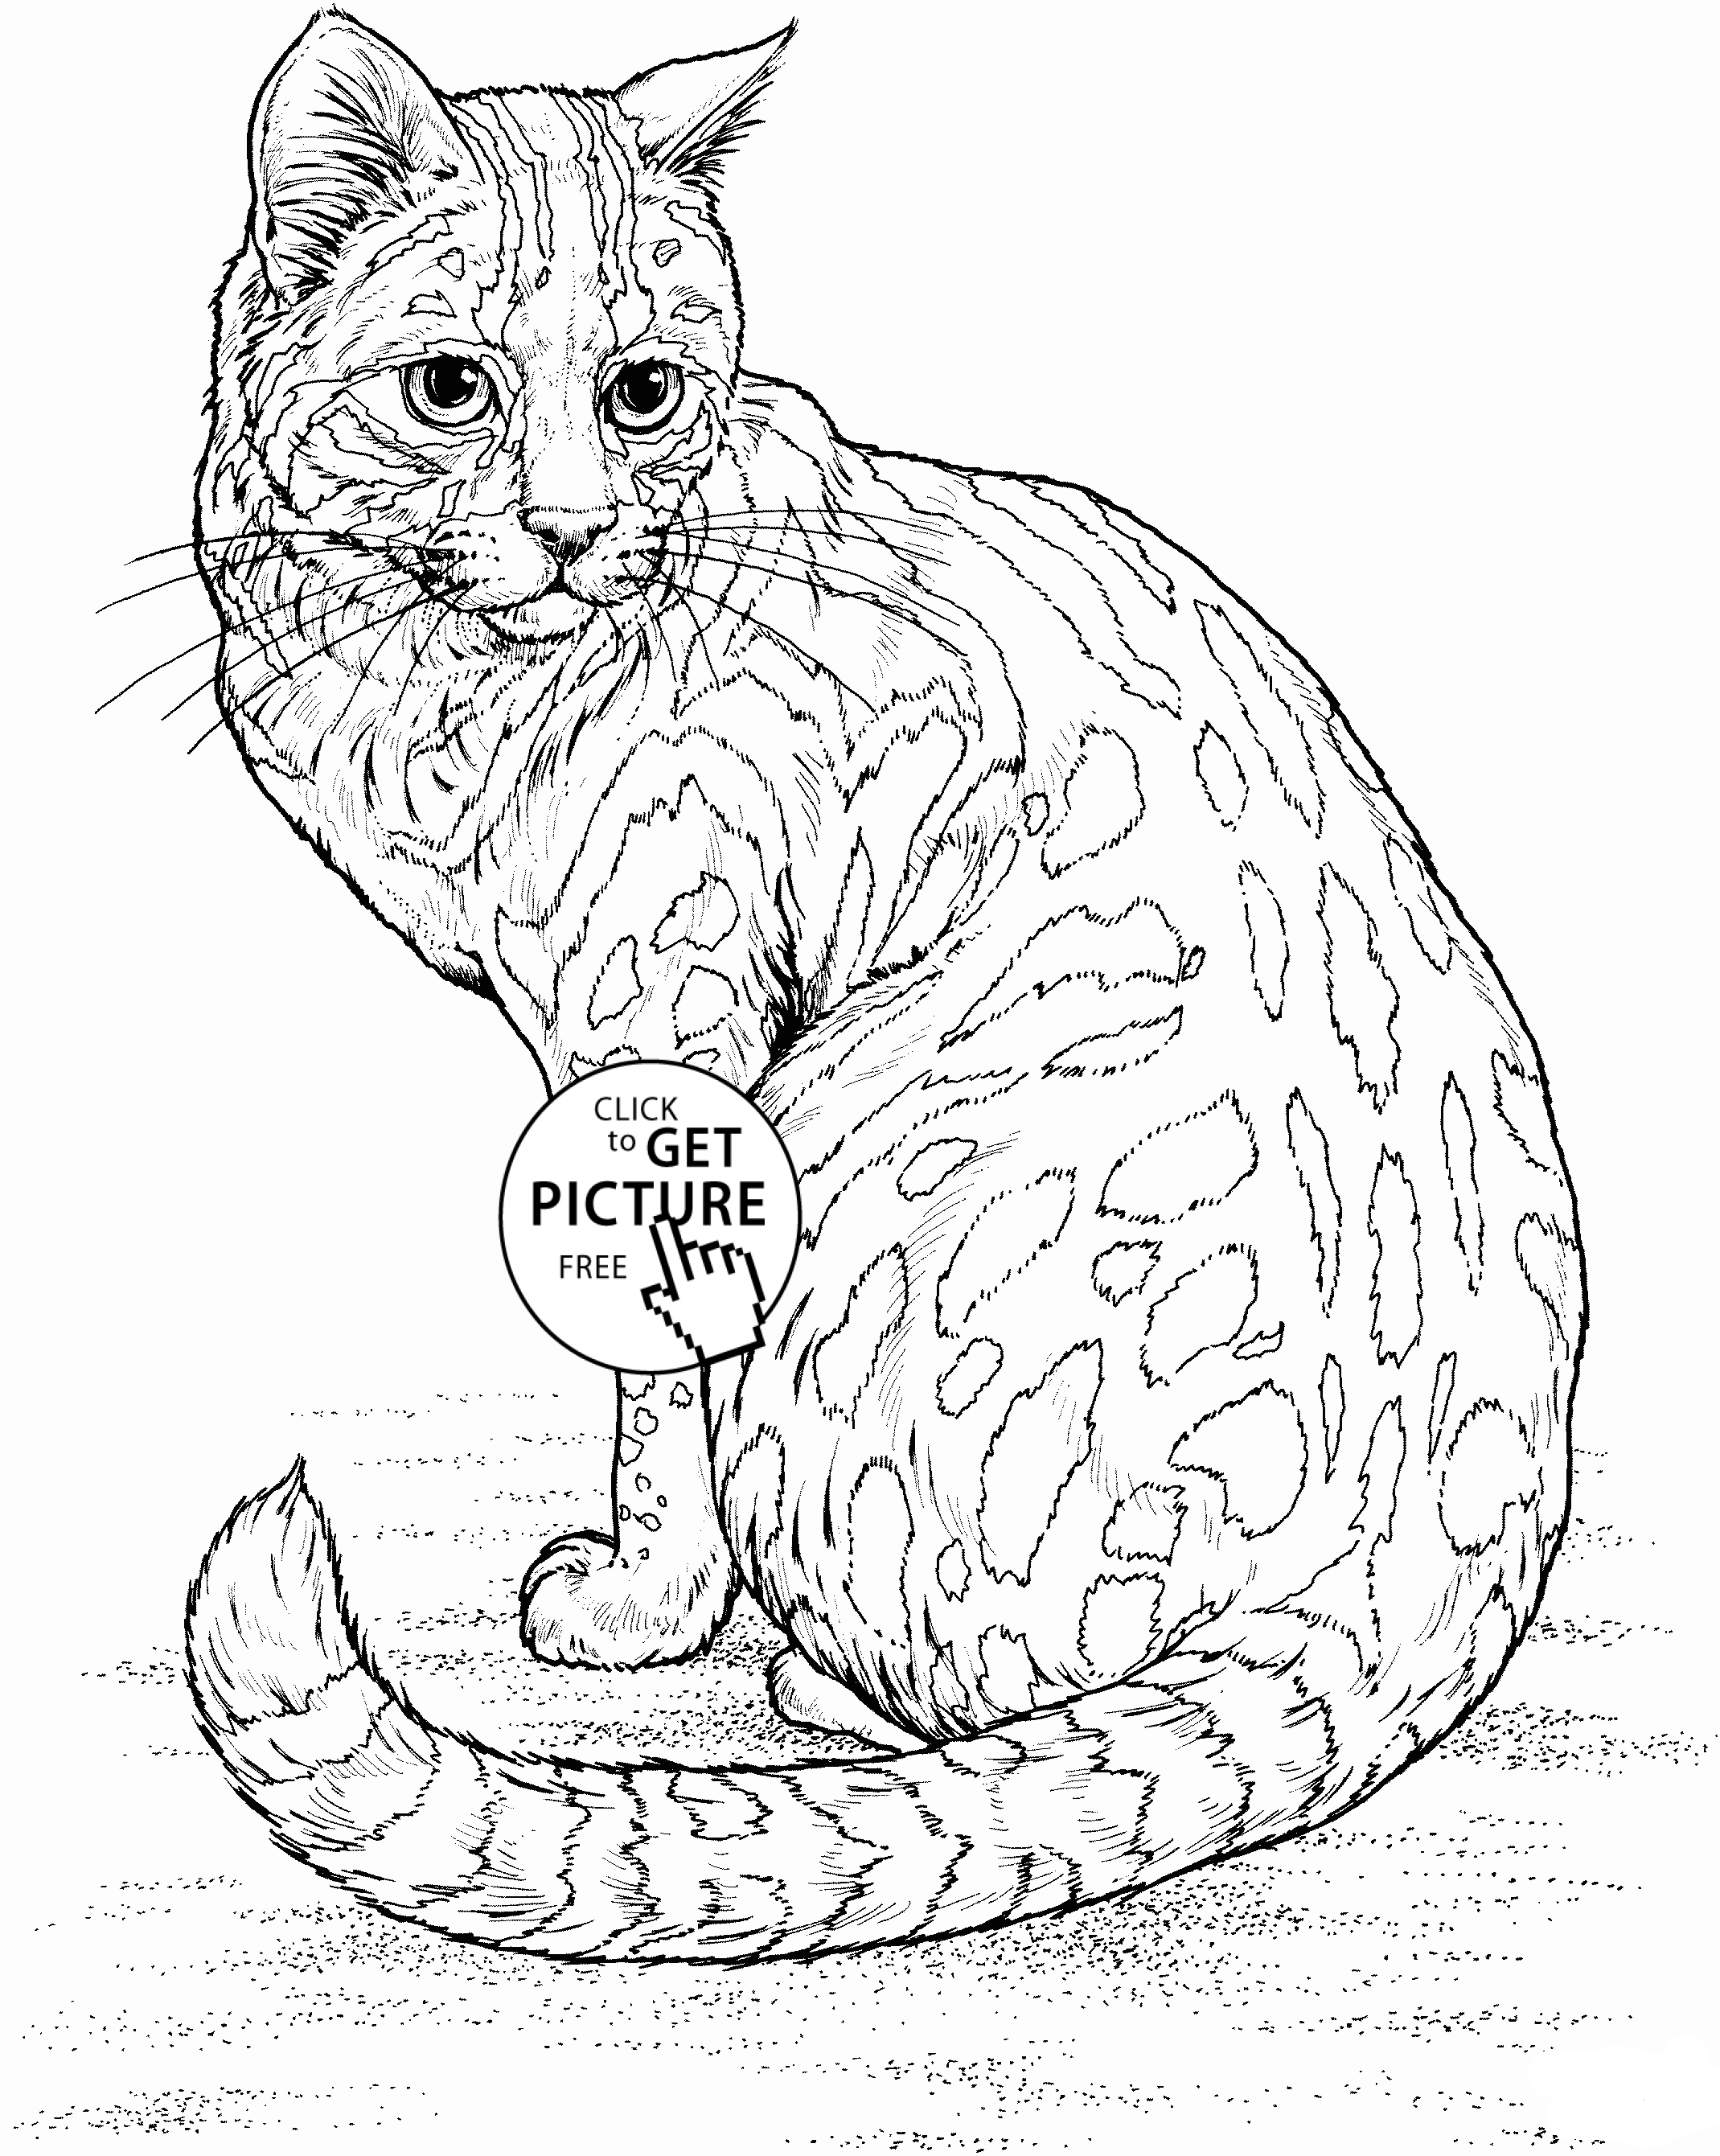 realistic animal coloring pages for adults realistic cat coloring page for kids animal coloring adults coloring animal for realistic pages 